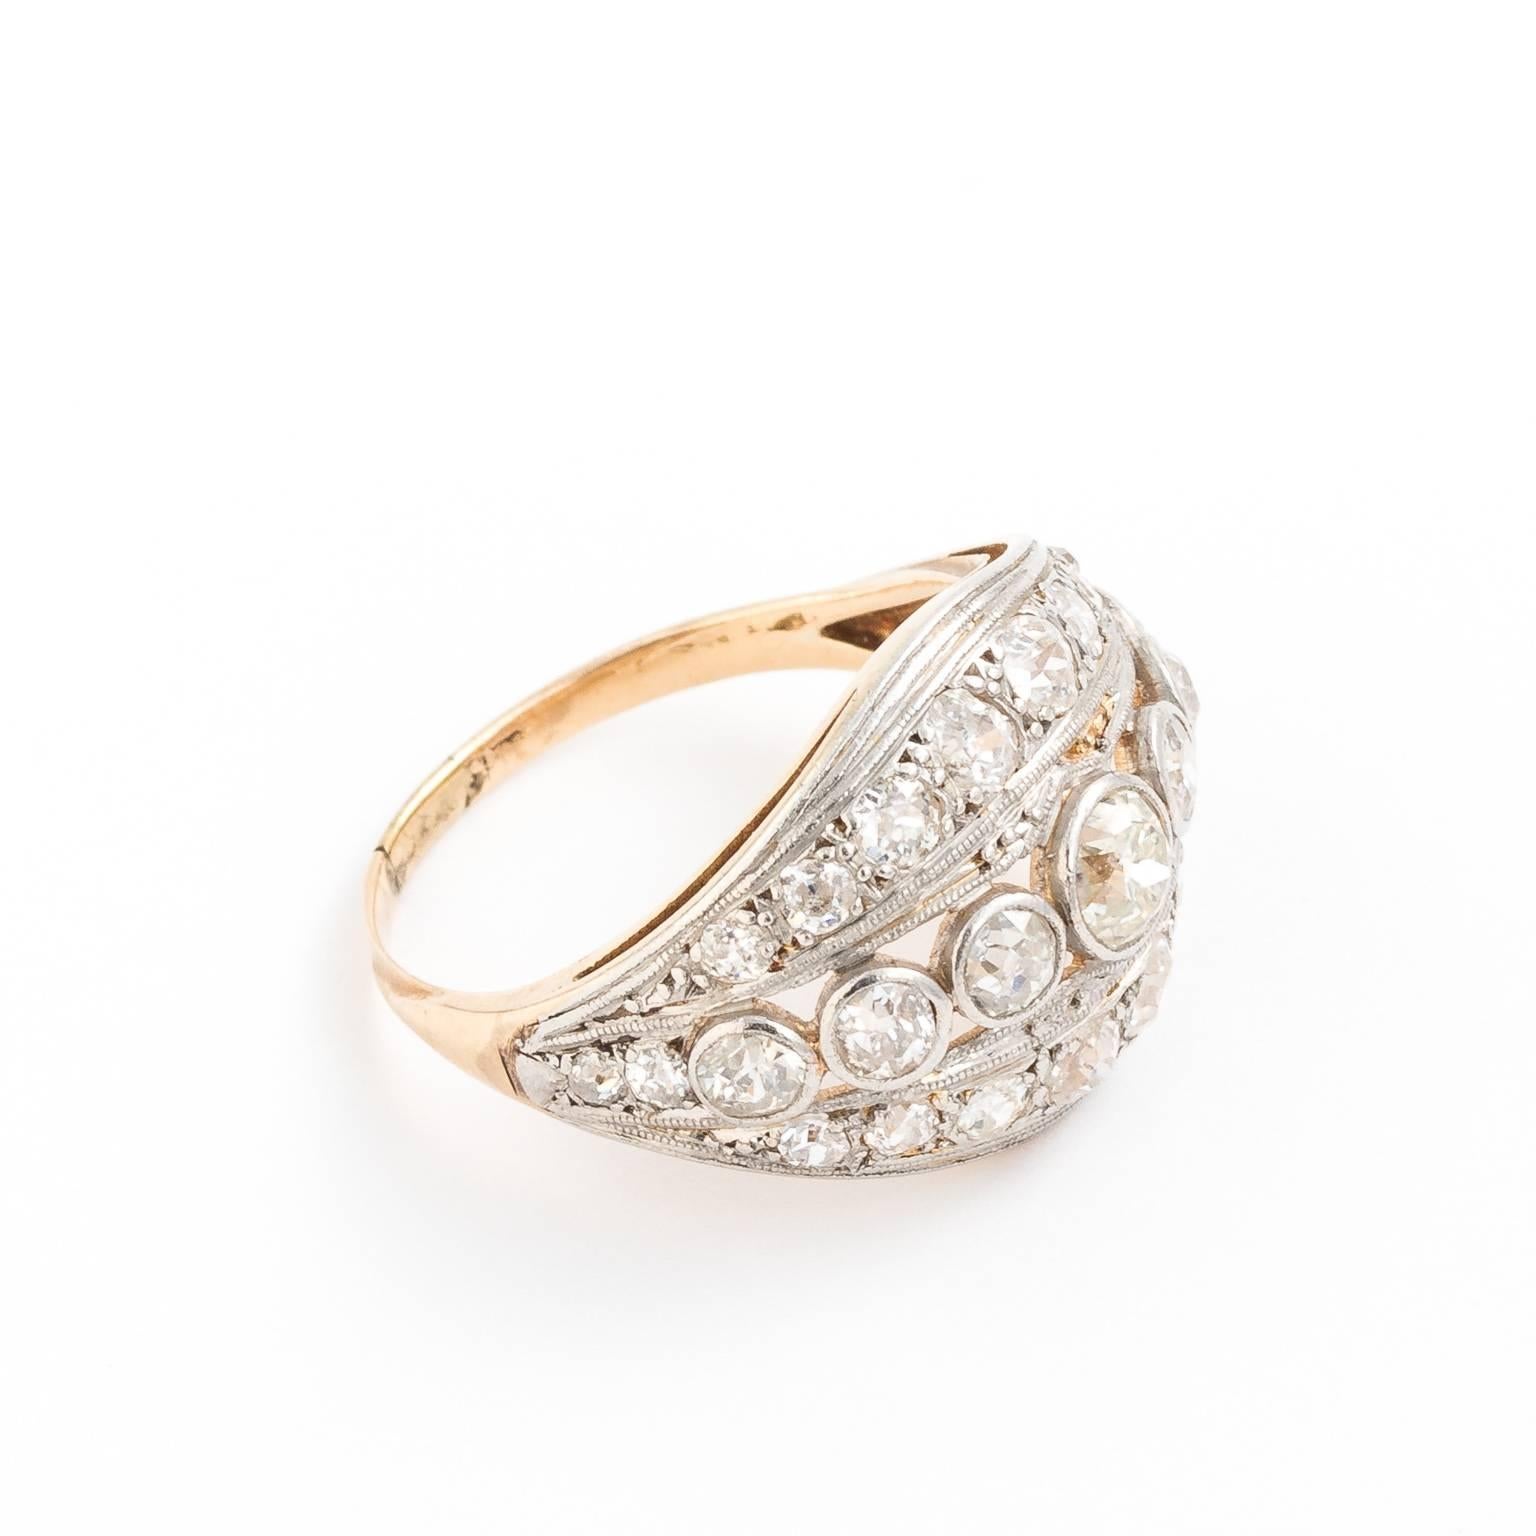 Circa 1910 multi-diamond stone ring consisting of diamonds weighing a total of 1.50cts. Set into platinum with three rows defined by a linear motif in platinum with 14kt yellow gold.
